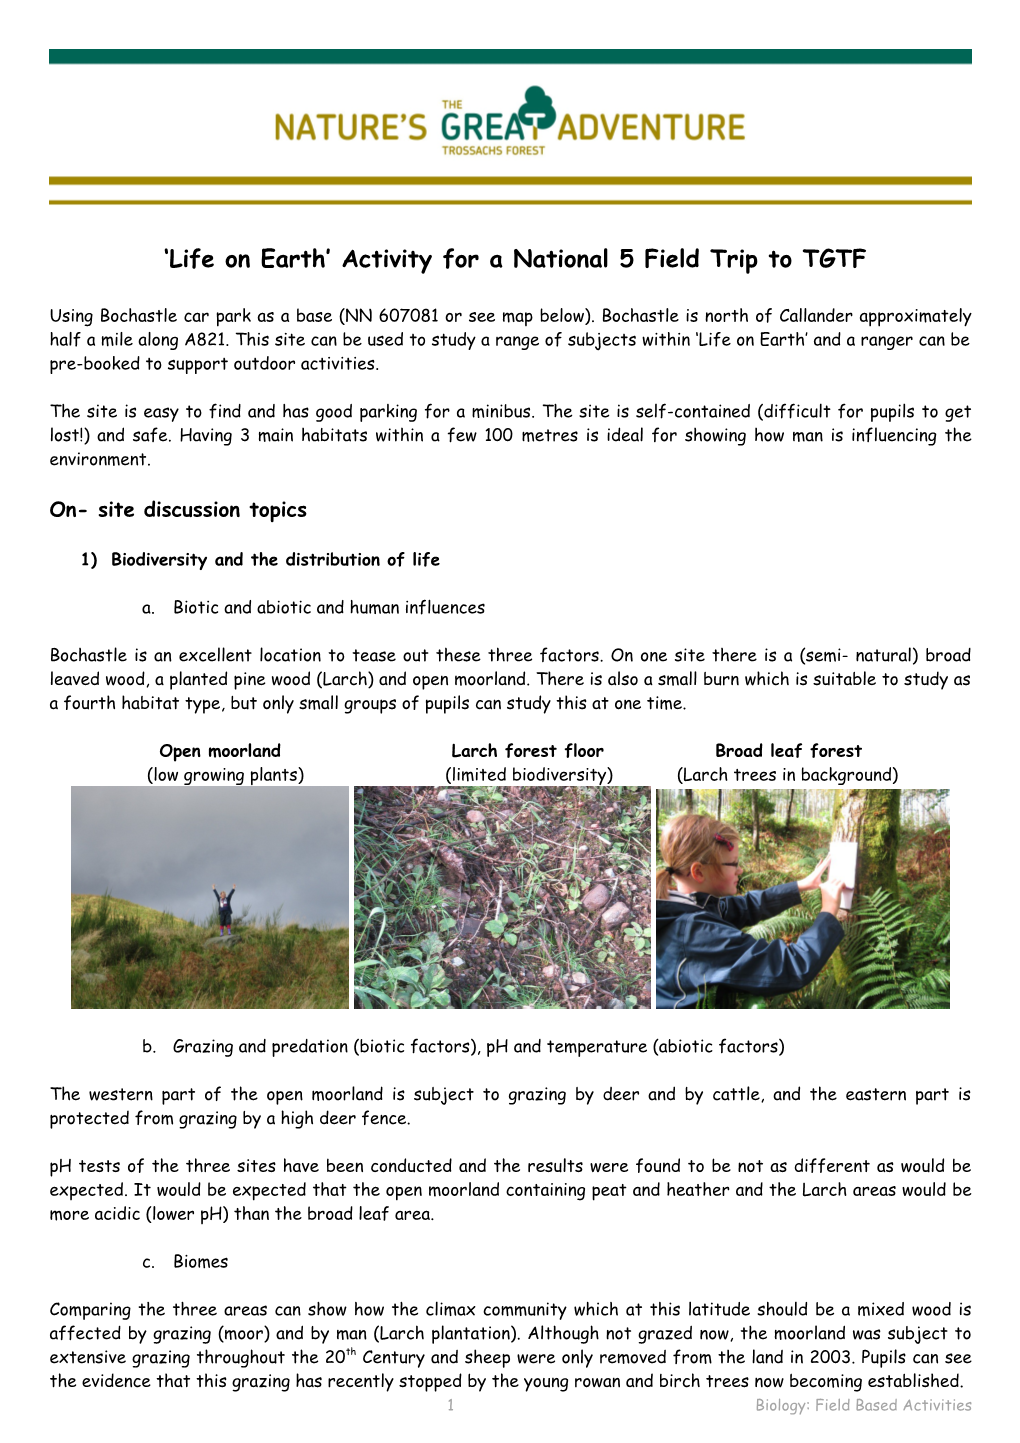 Life on Earth Activity for a National 5 Field Trip to TGTF